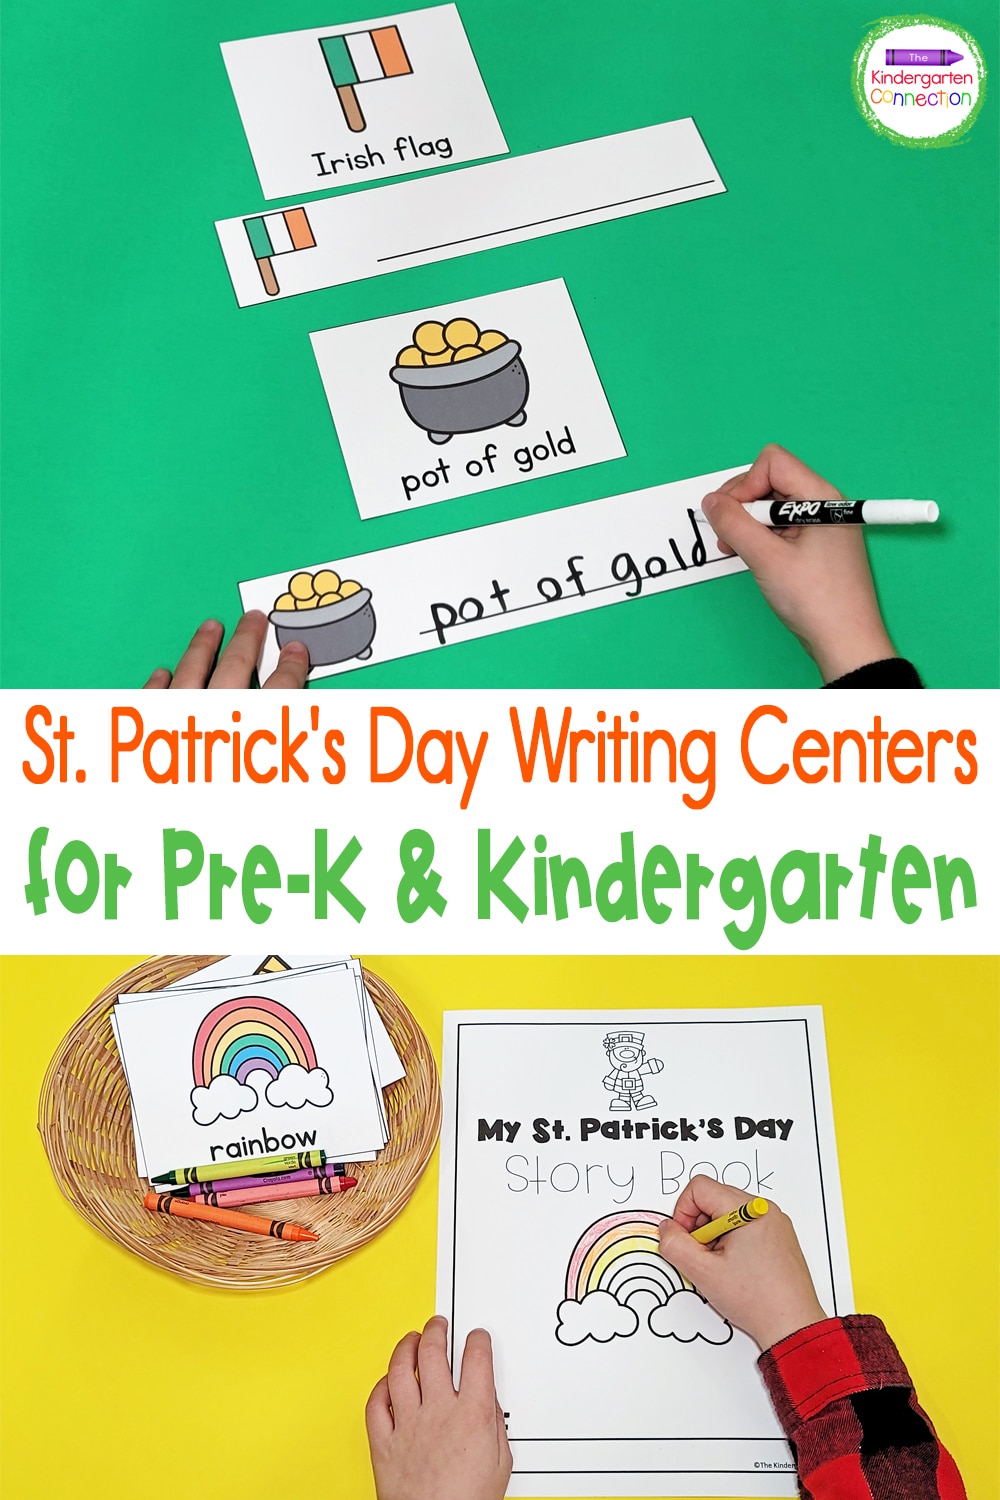 These St. Patrick's Day Writing Activities for Pre-K & Kindergarten are perfect for early writers to practice labeling and sentence writing!